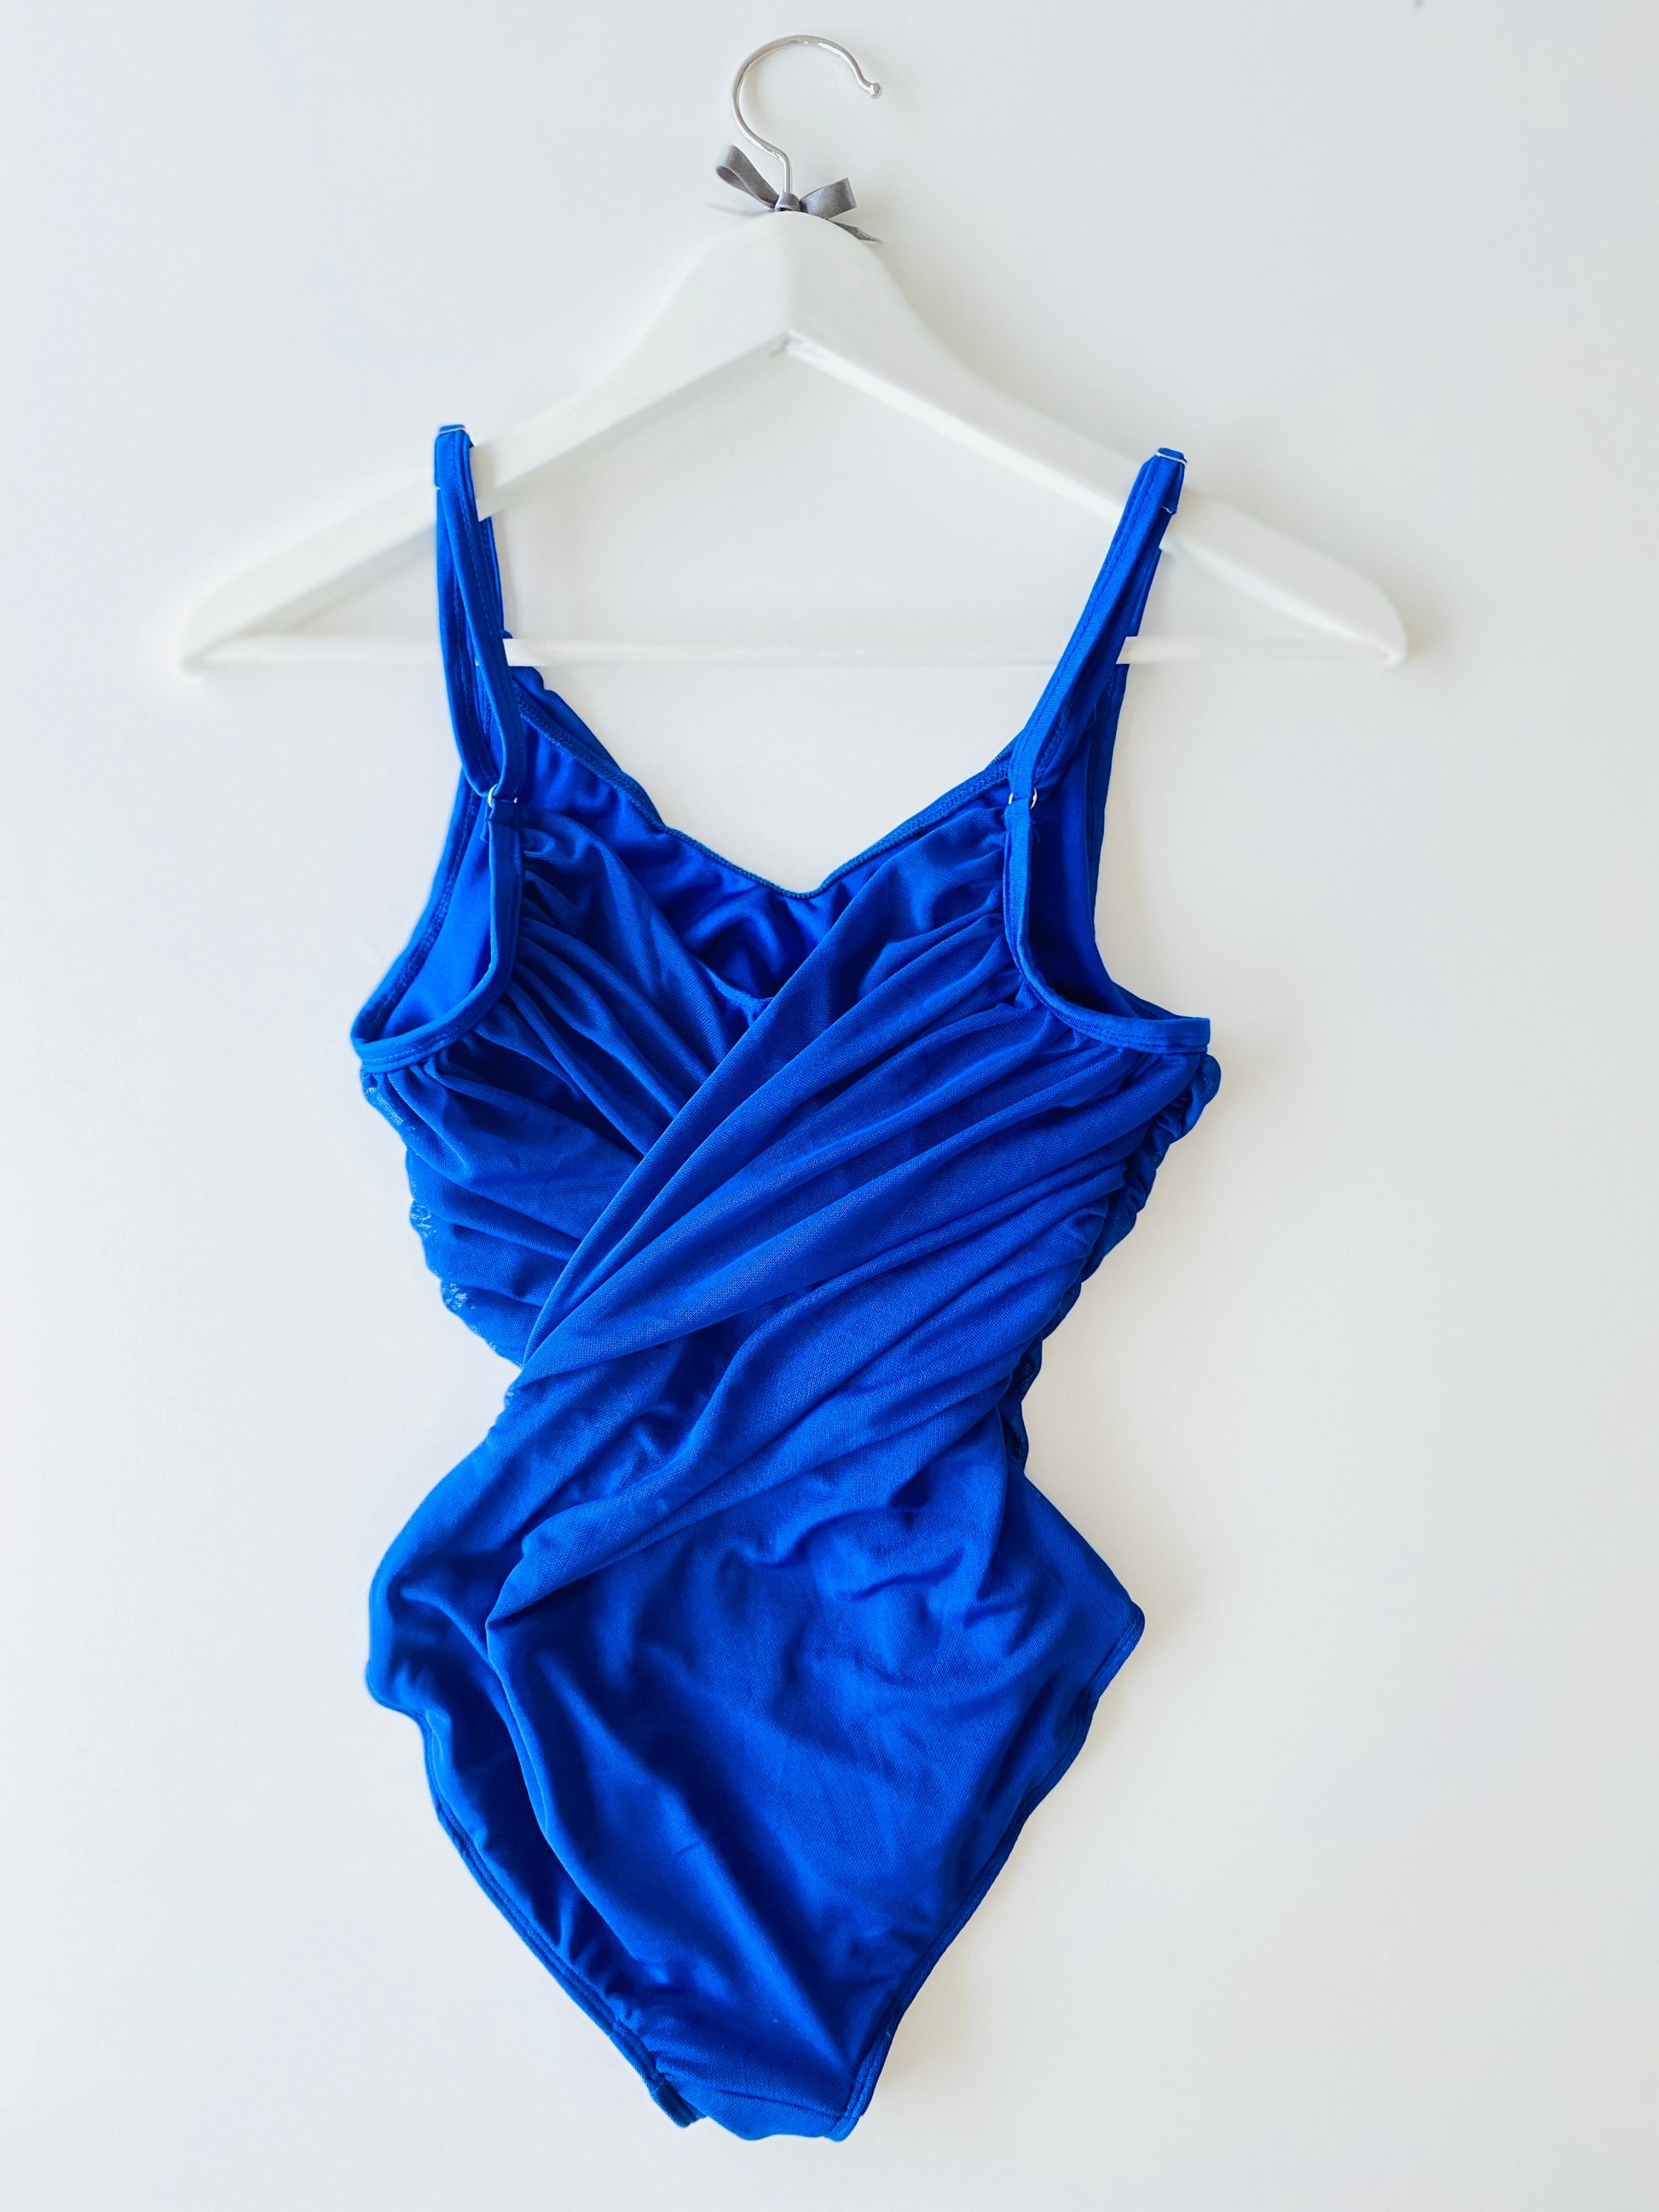 Ruched camisole ballet leotard with draped mesh in Royal Blue from The Collective